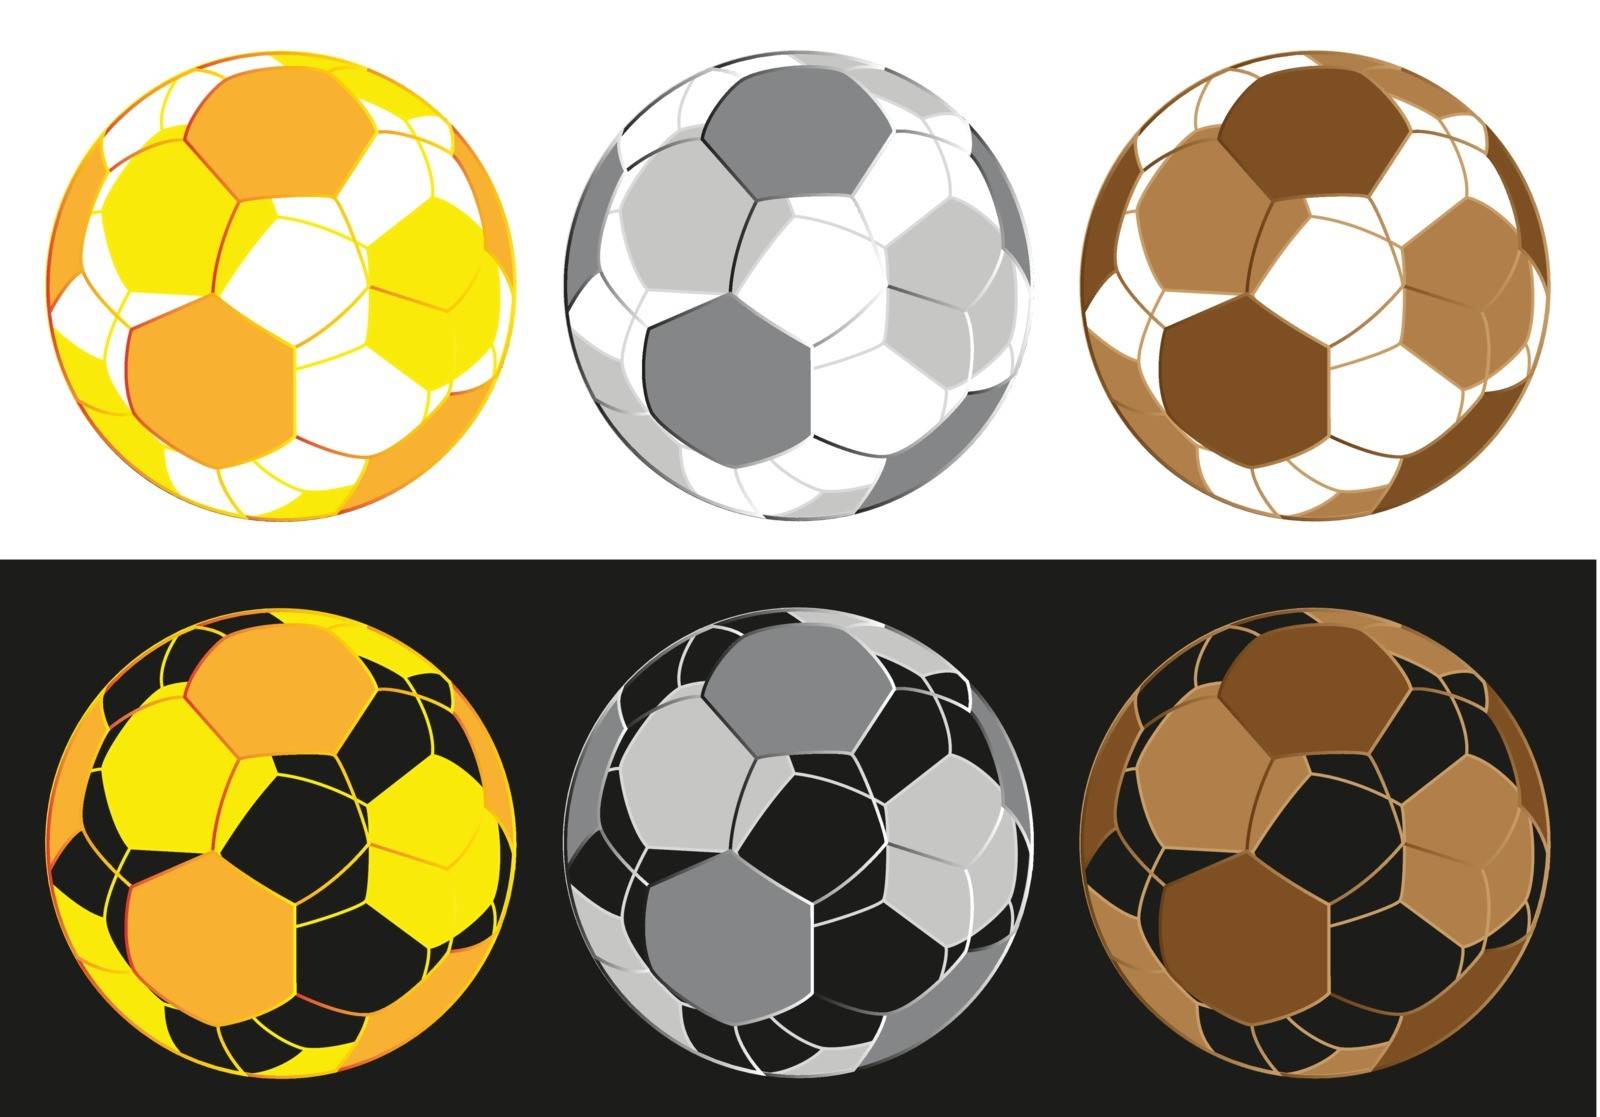 Dimensional model of football in gold, silver and brown on white and black background. 